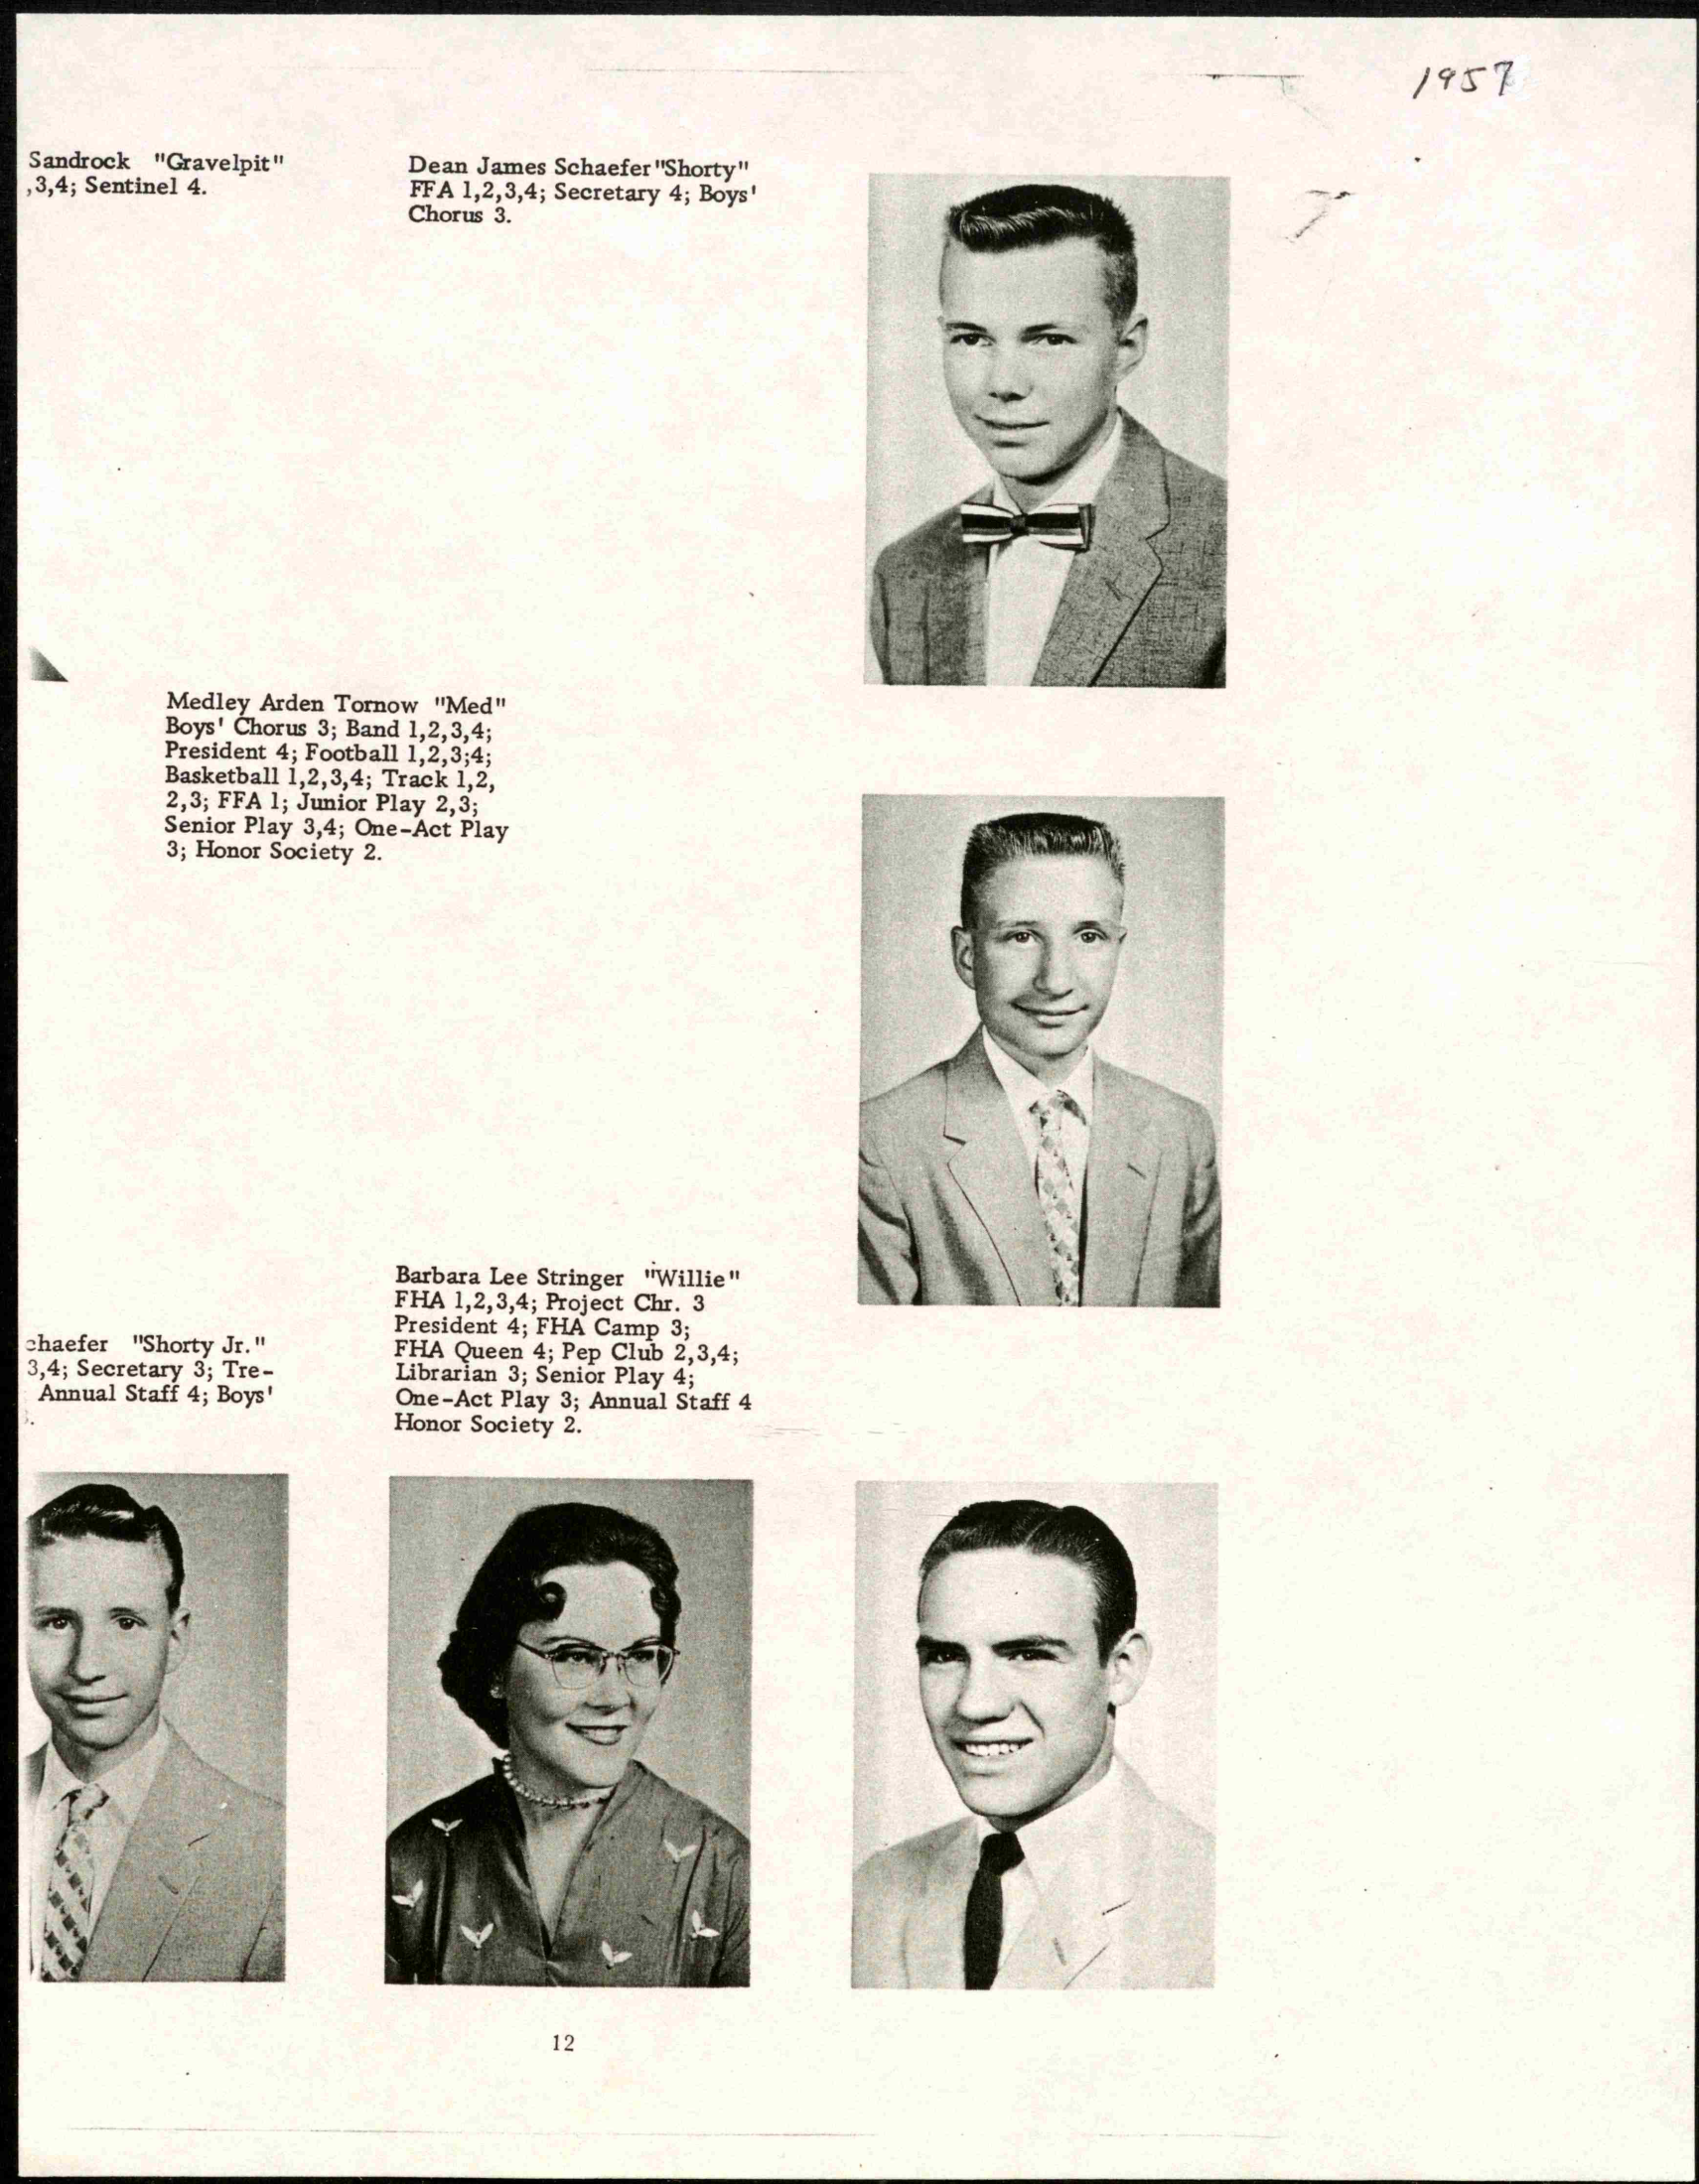 Album 16 MANLIUS HIGH SCHOOL FROM 1950-1995 Page 131